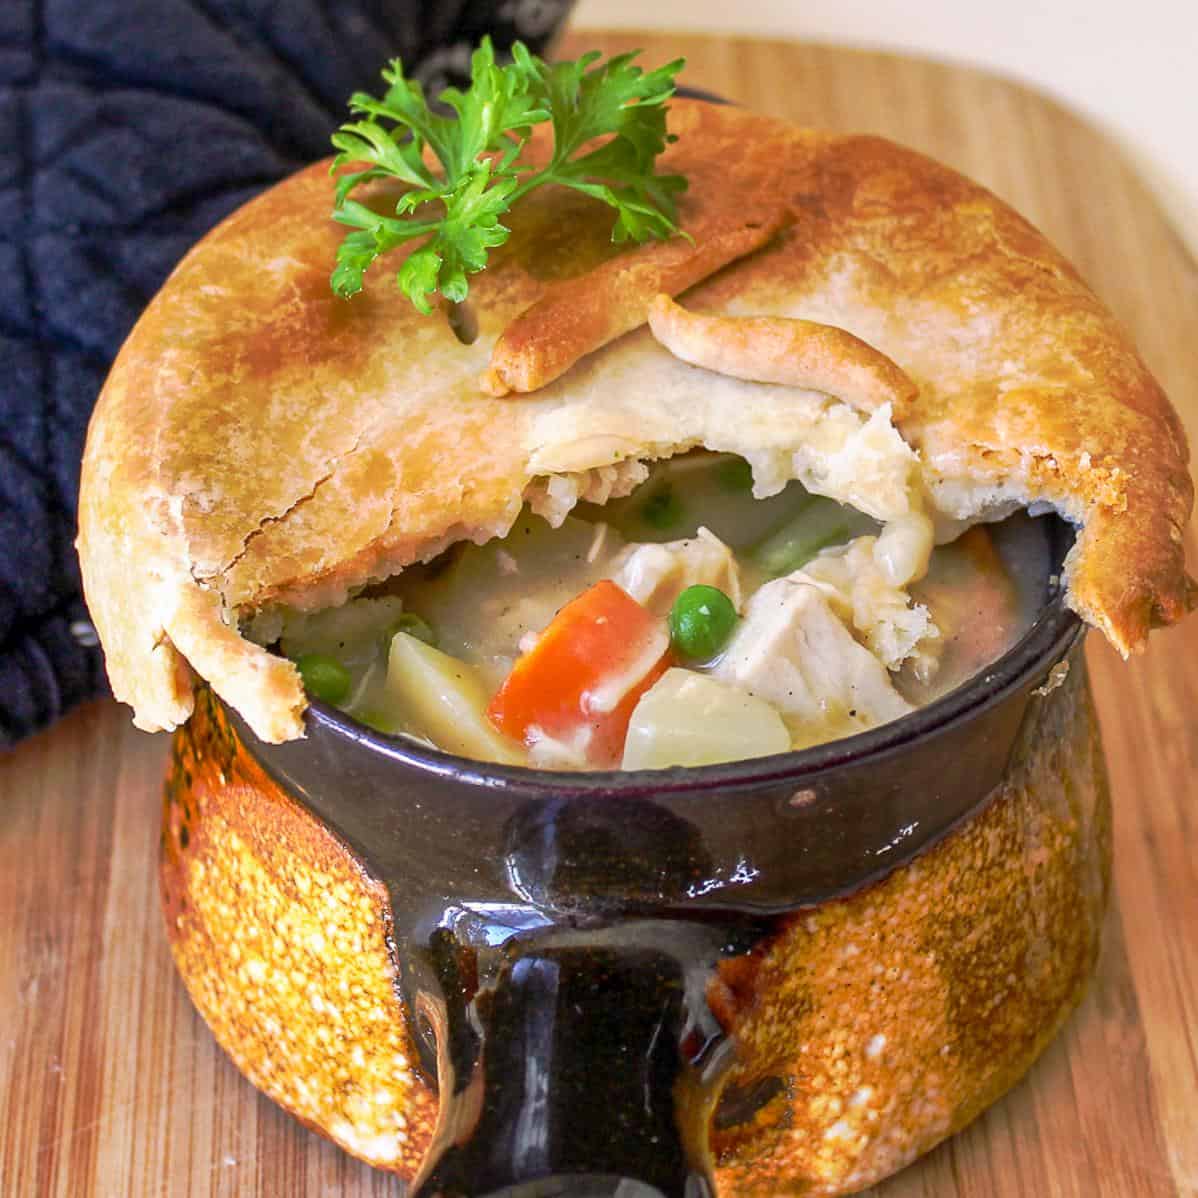  The perfect dish to serve when company is coming over - this classic chicken pot pie will impress them all.